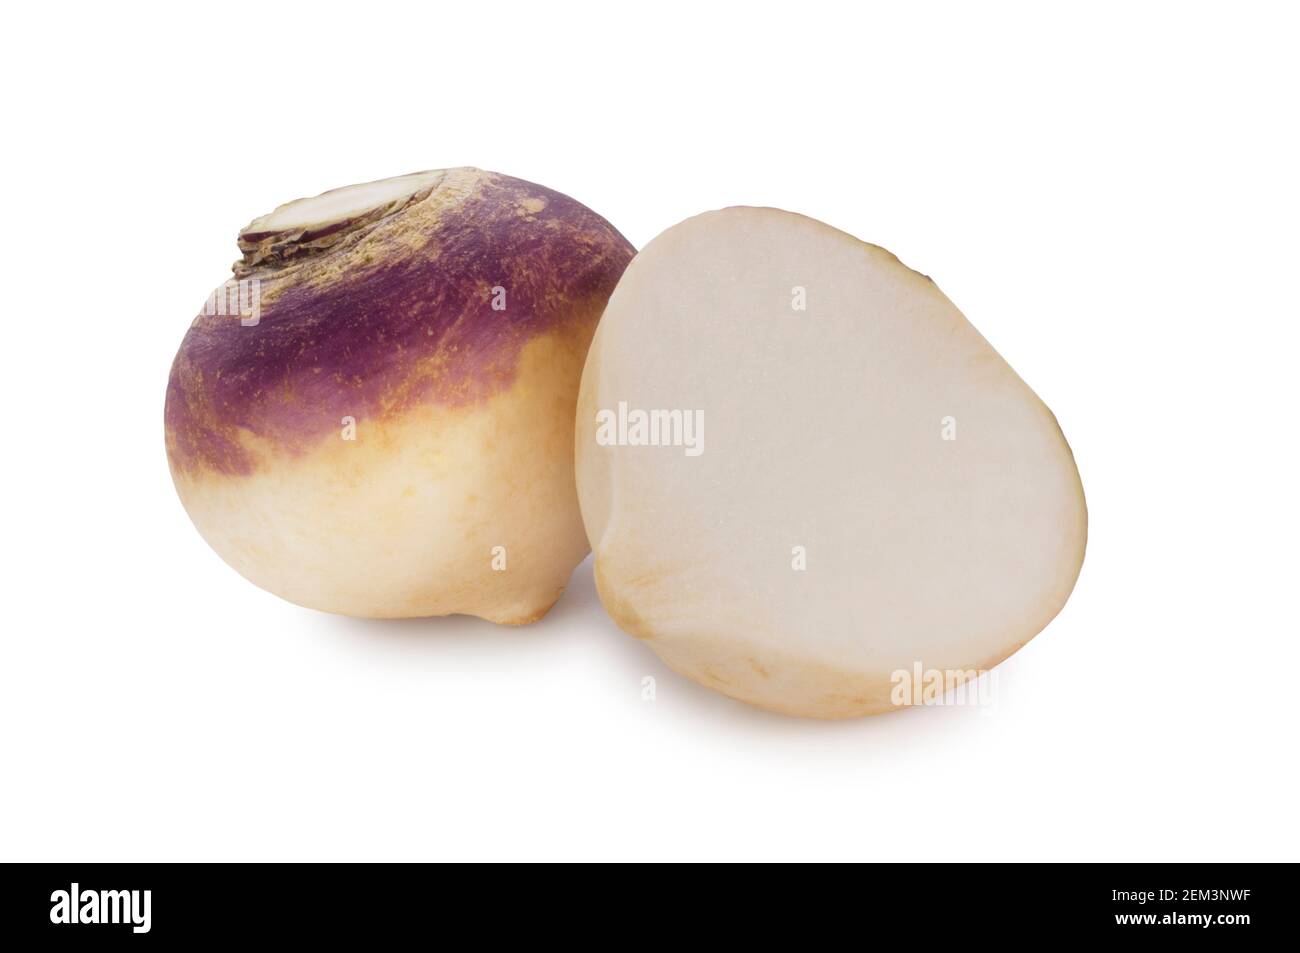 Studio shot of turnips cut out against a white background - John Gollop Stock Photo